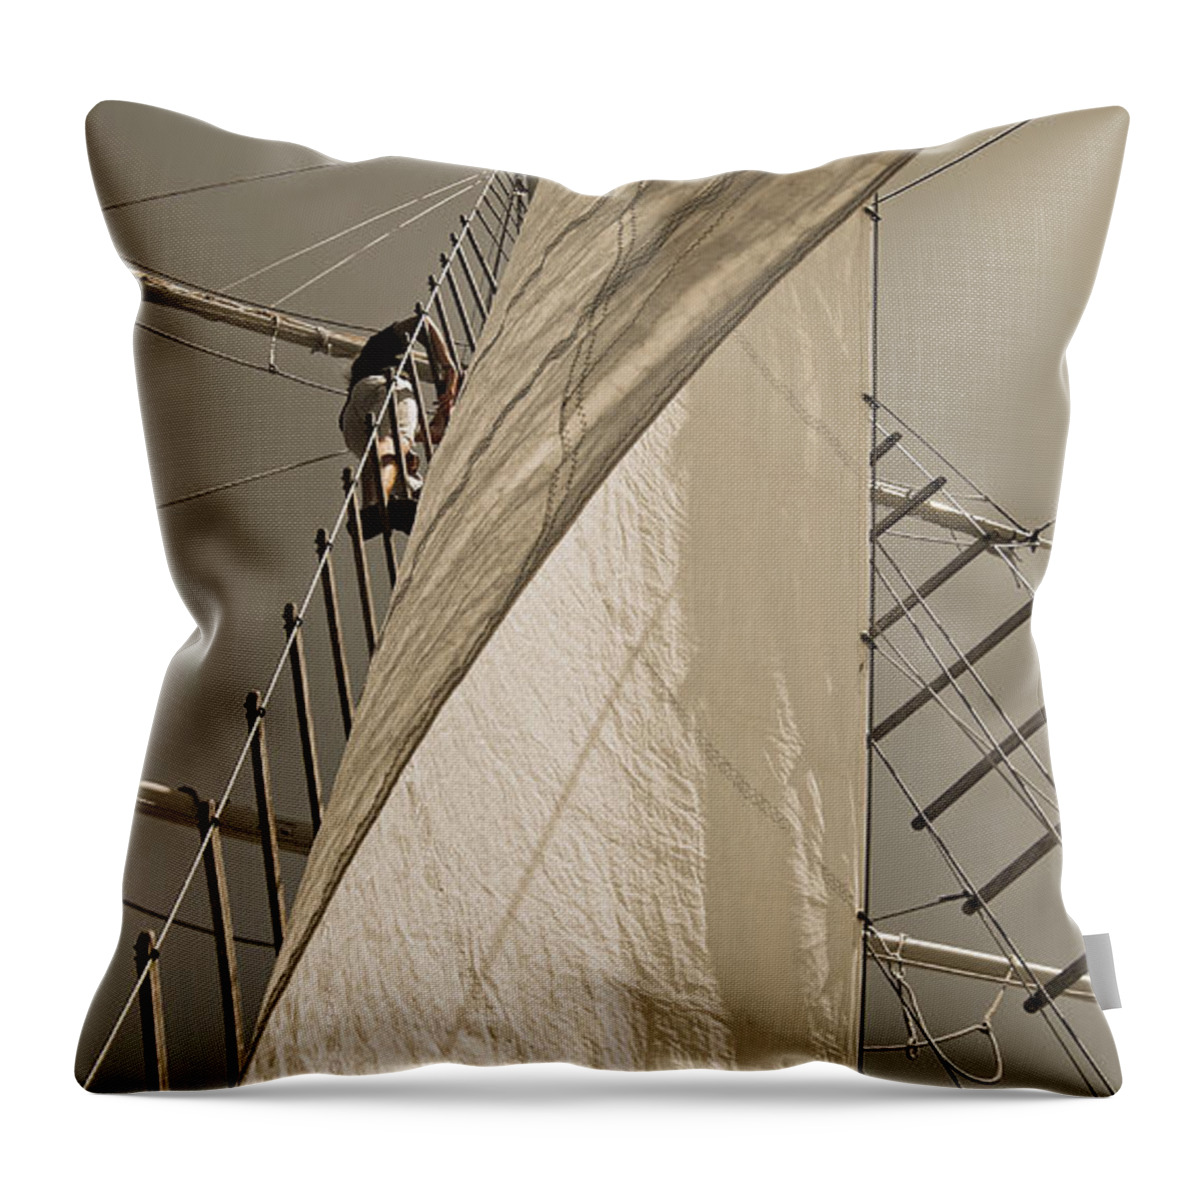 Schooner Throw Pillow featuring the photograph Hoisting The Mainsail In Sepia by Jani Freimann